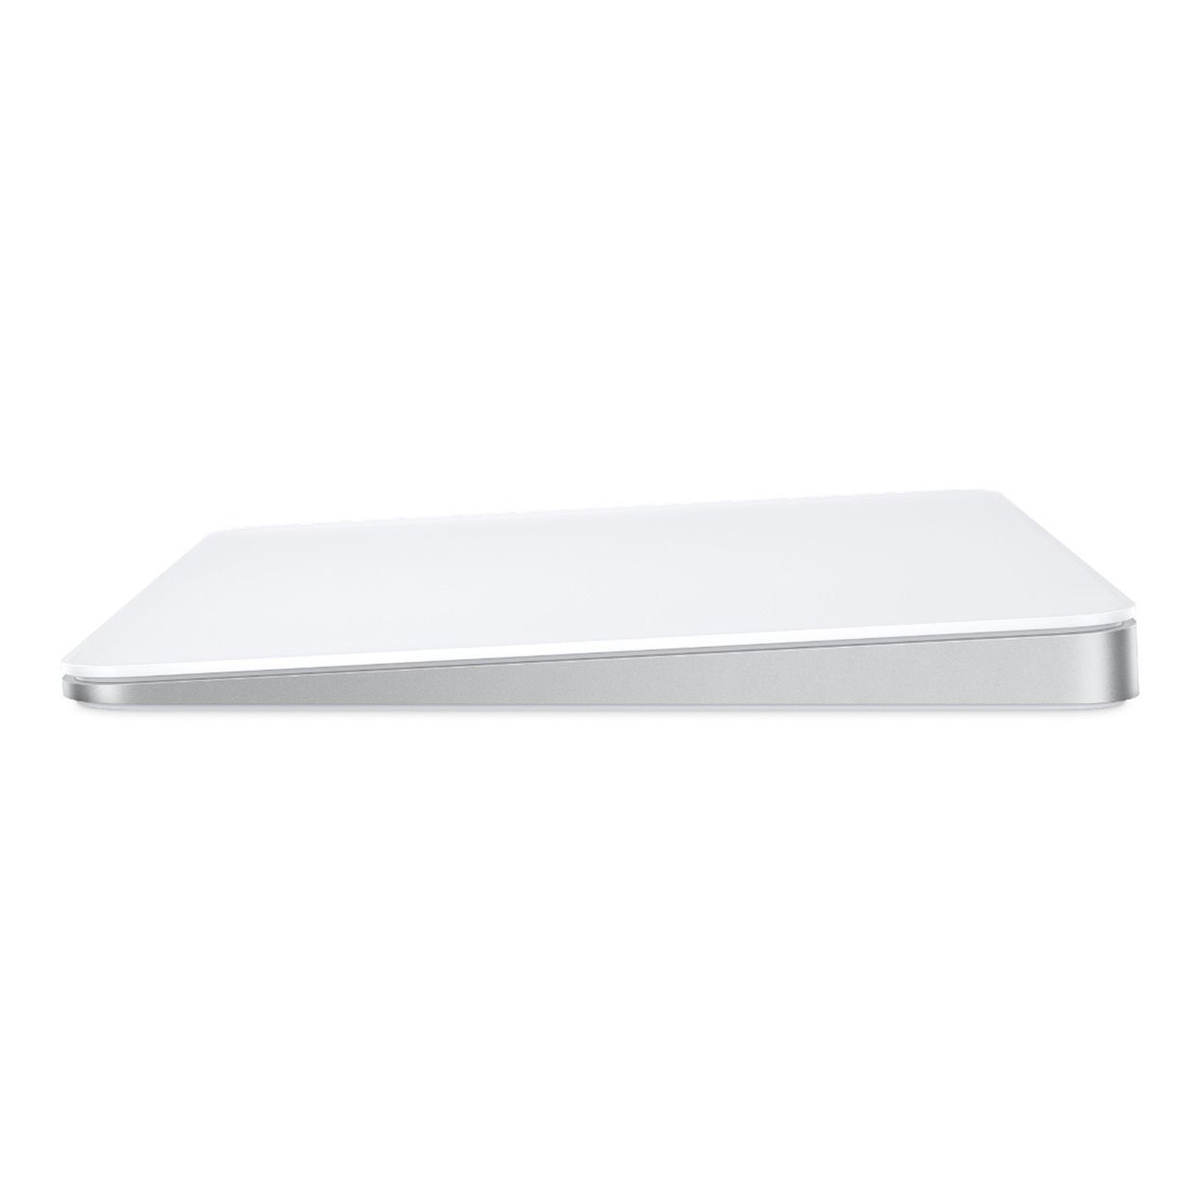 Apple Magic Track Pad with Multi-Touch Surface, White, MK2D3ZE